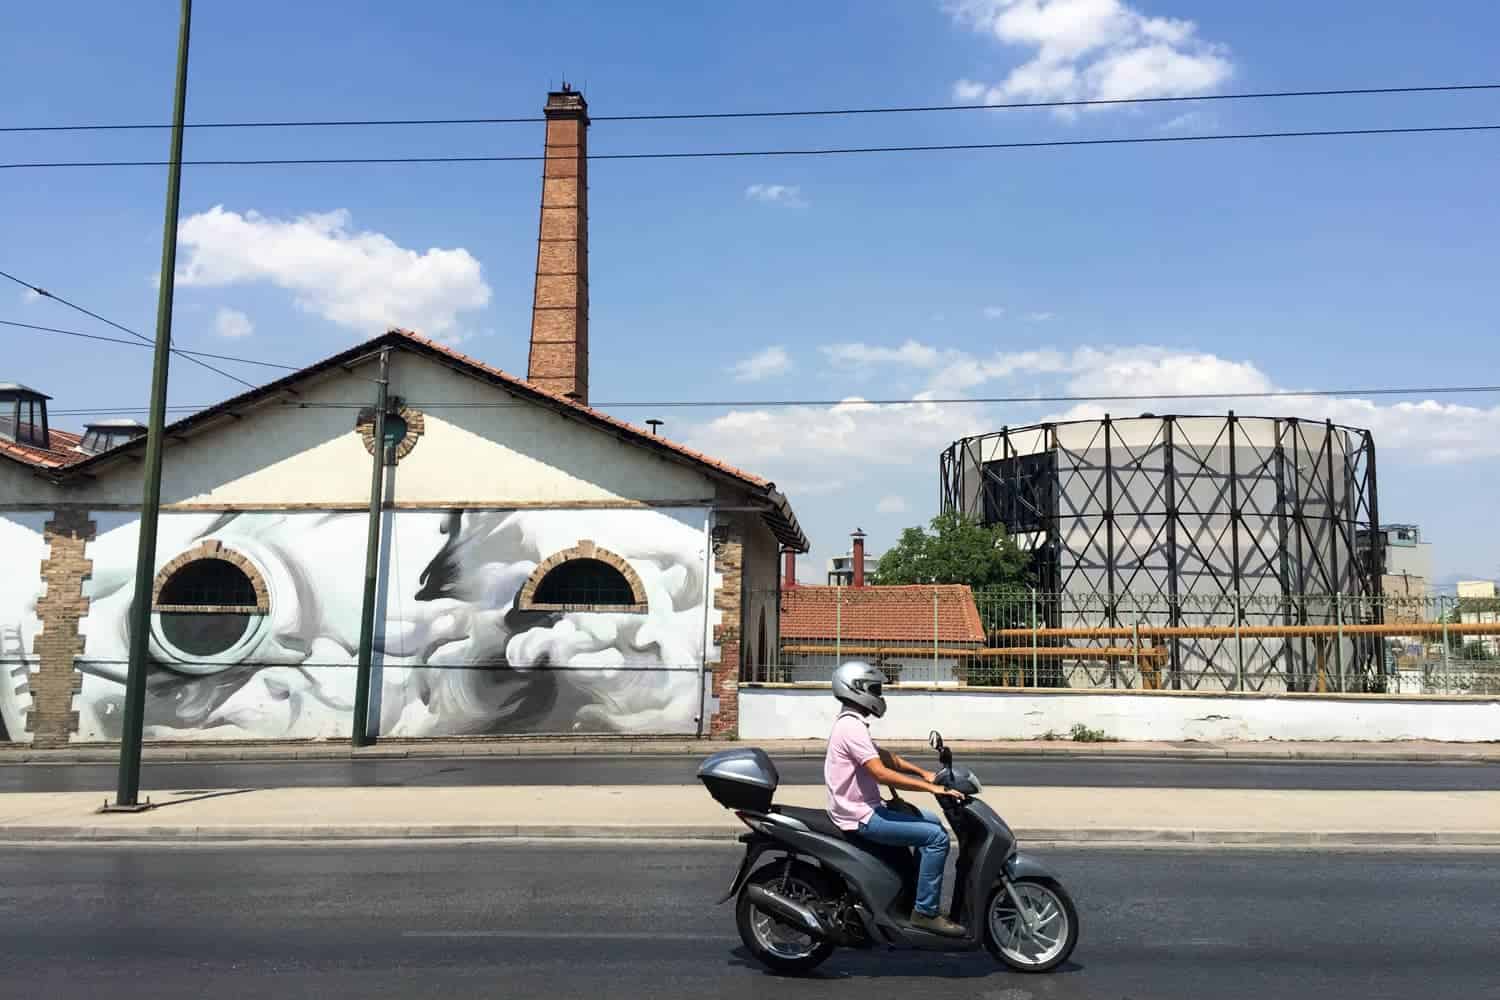 A person on a motorcycle rides past a modern triangular roofed building covered in street art, a golden bricked column and a round building with a metal and glass exterior - an industrial area of Athens. 